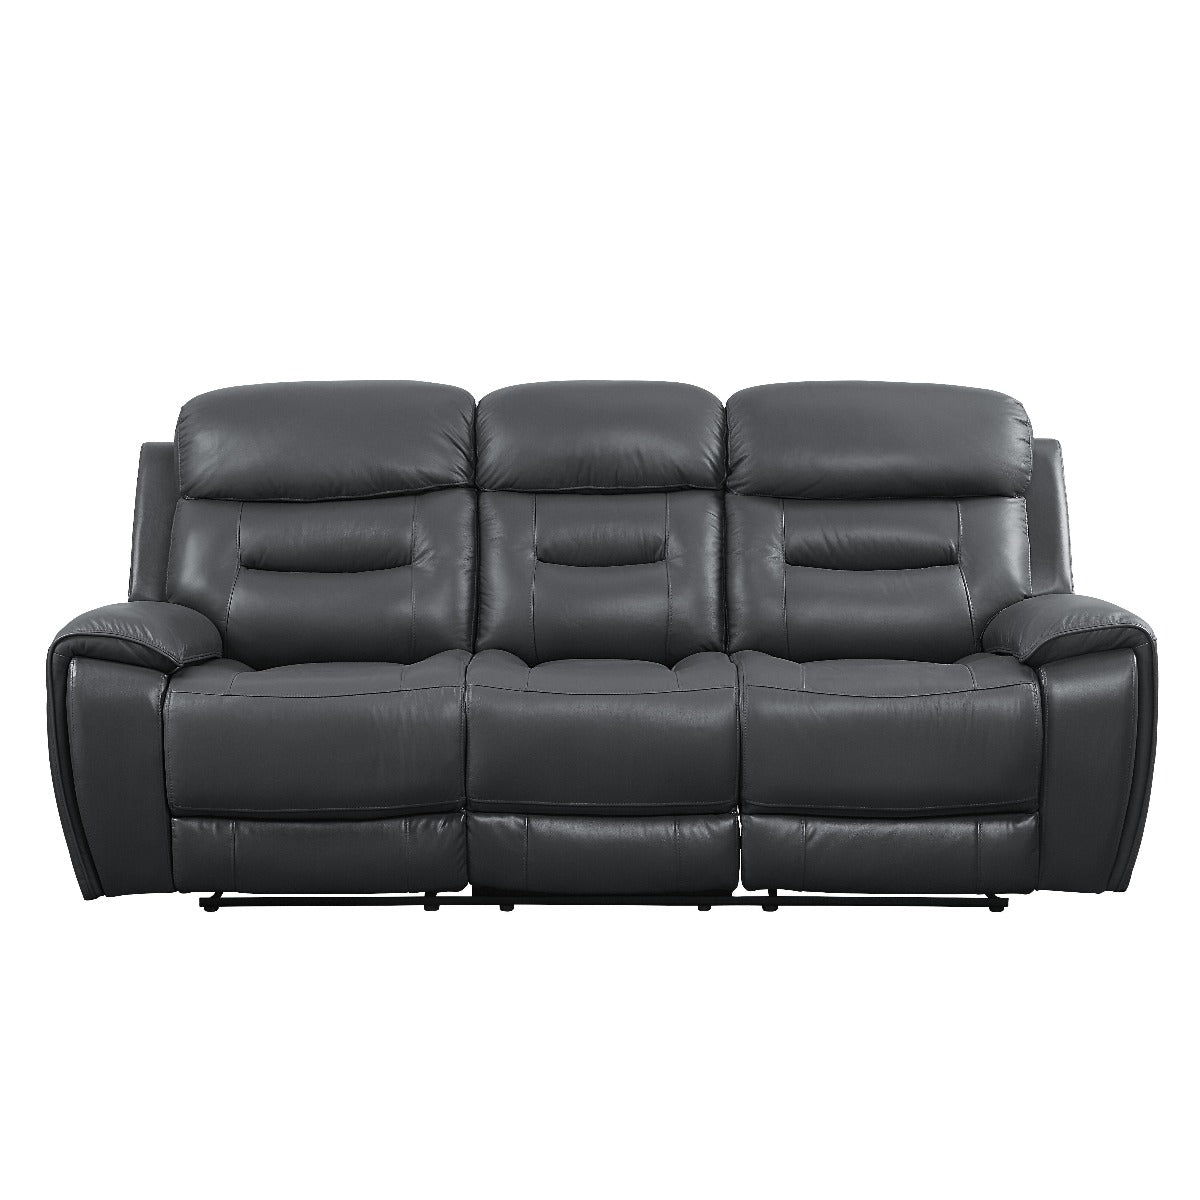 Lamruil Motion Sofa Collection - Gray Top Grain Leather